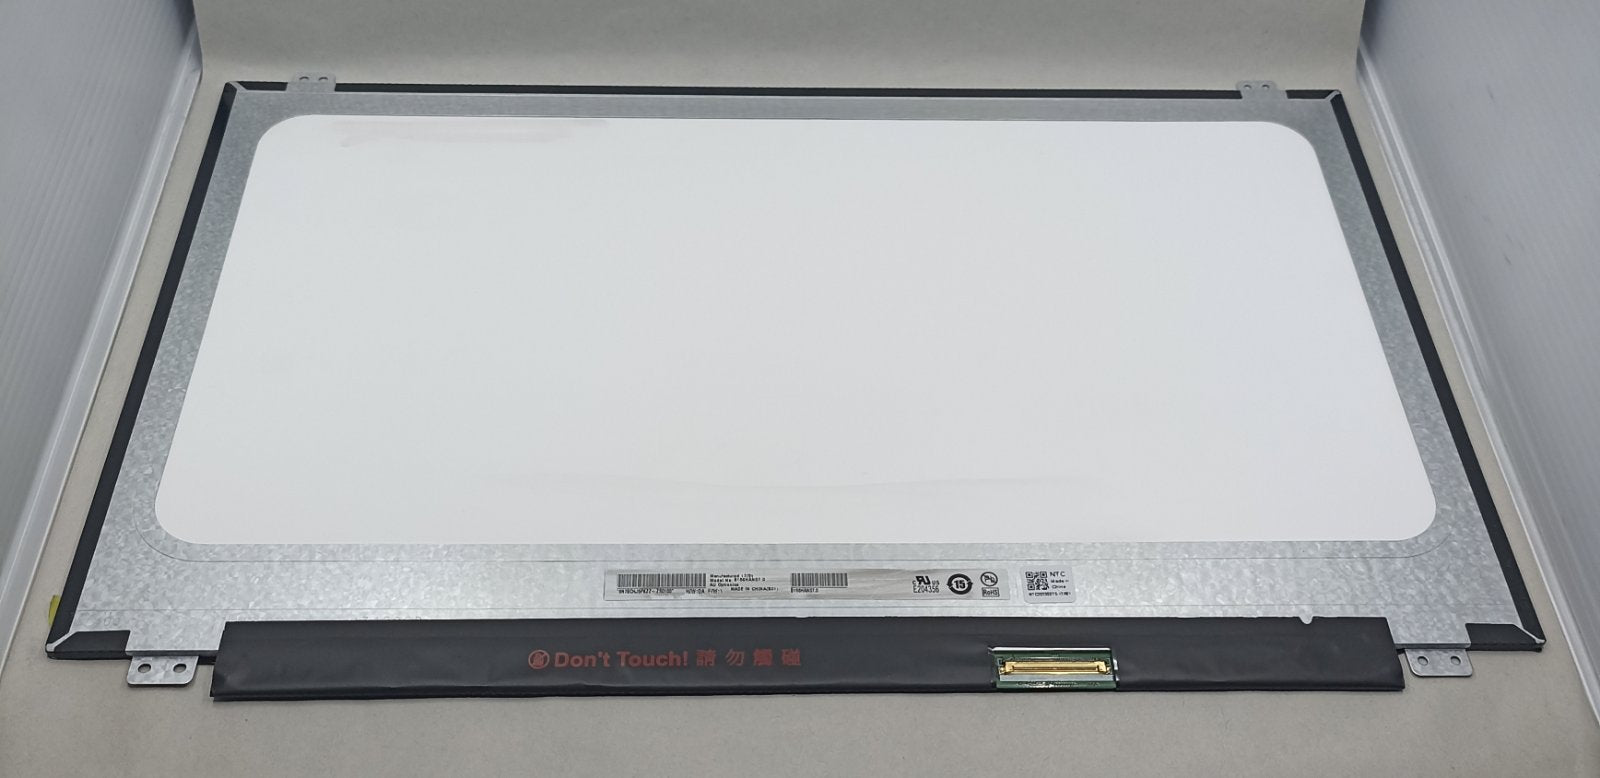 Replacement LCD for Acer AN515-52 WL